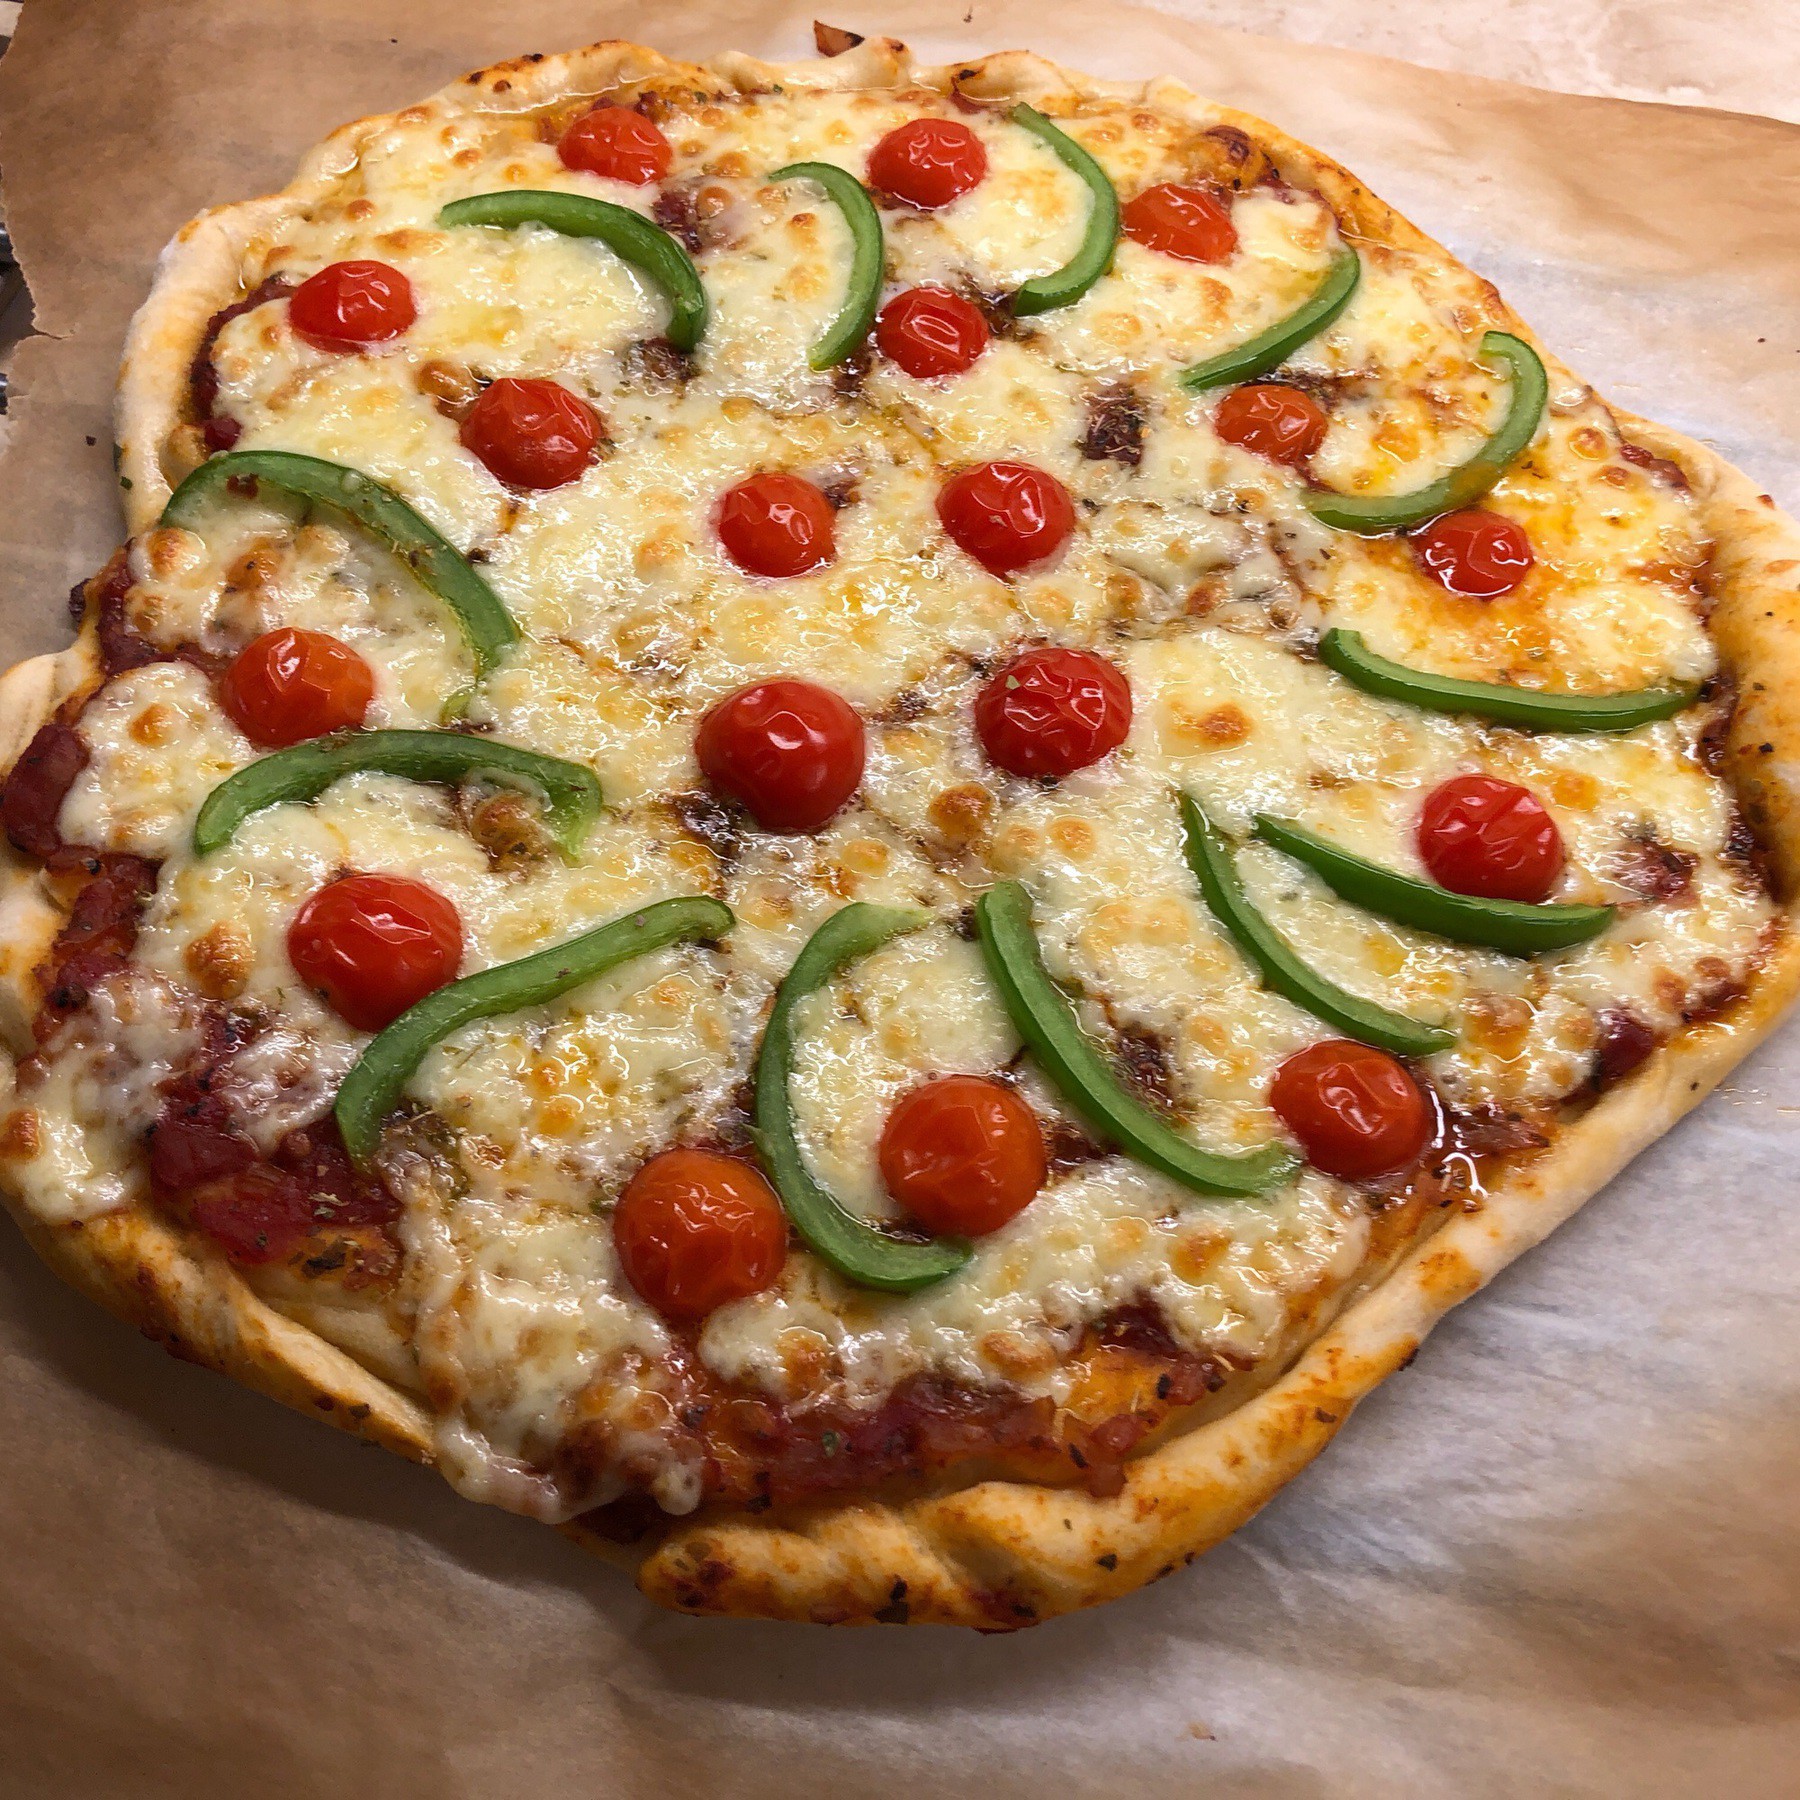 Veggie pizza with tomatoes and green pepper and cheese.